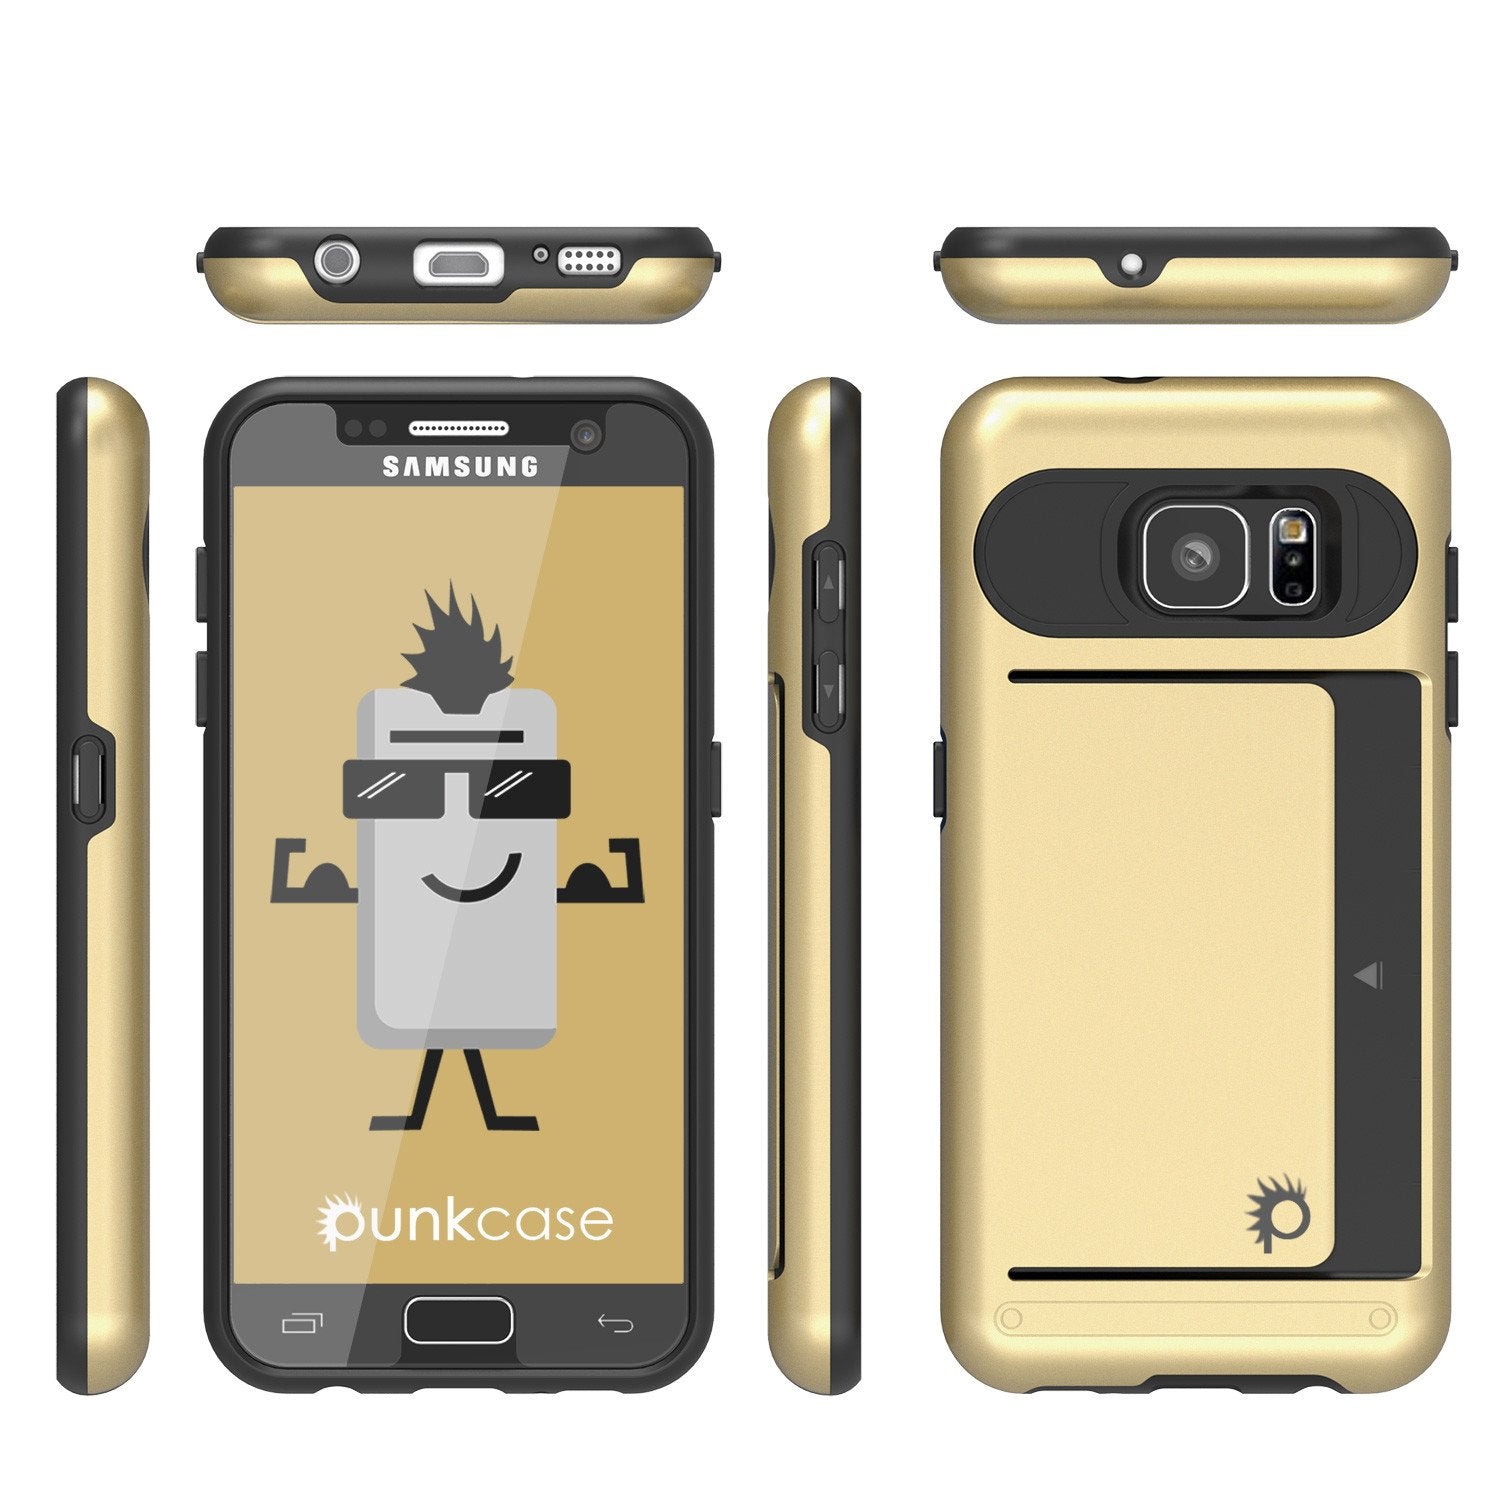 Galaxy s7 Case PunkCase CLUTCH Gold Series Slim Armor Soft Cover Case w/ Tempered Glass